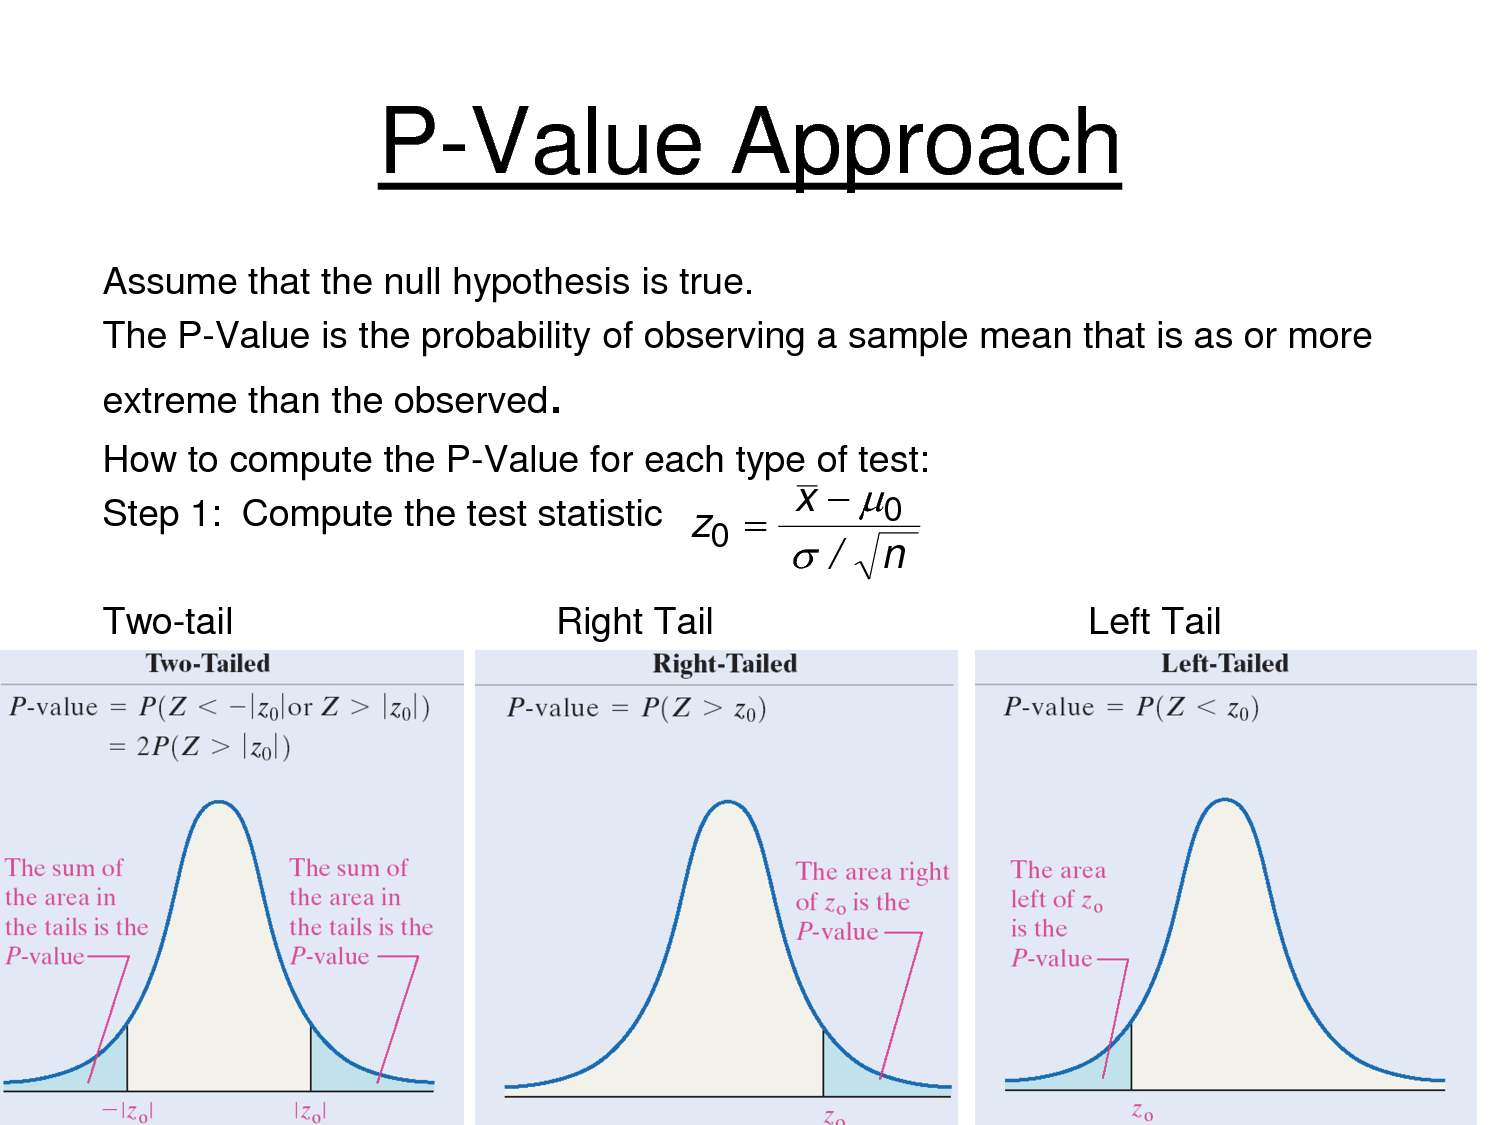 Two-tail Two-Tailed P-value = P (Z < —IzolorZ \> Izol) = 2P(Z \>
 Izol) P-VaIue Approach Assume that the null hypothesis is true. The
 P-Value is the probability of observing a sample mean that is as or
 more extreme than the observed. How to compute the P-Value for each
 type of test: x—go Step 1: Compute the test statistic zo I Zol Right
 Tail Right-Tailed P-value = \> zo) The area right of zo is the P-value
 The sum of the area in the tails is the P-value l: 01 The sum of the
 area in the tails is the P-value Left Tail Left-Tailed P-value = <
 zo) The area left of is the P-value 